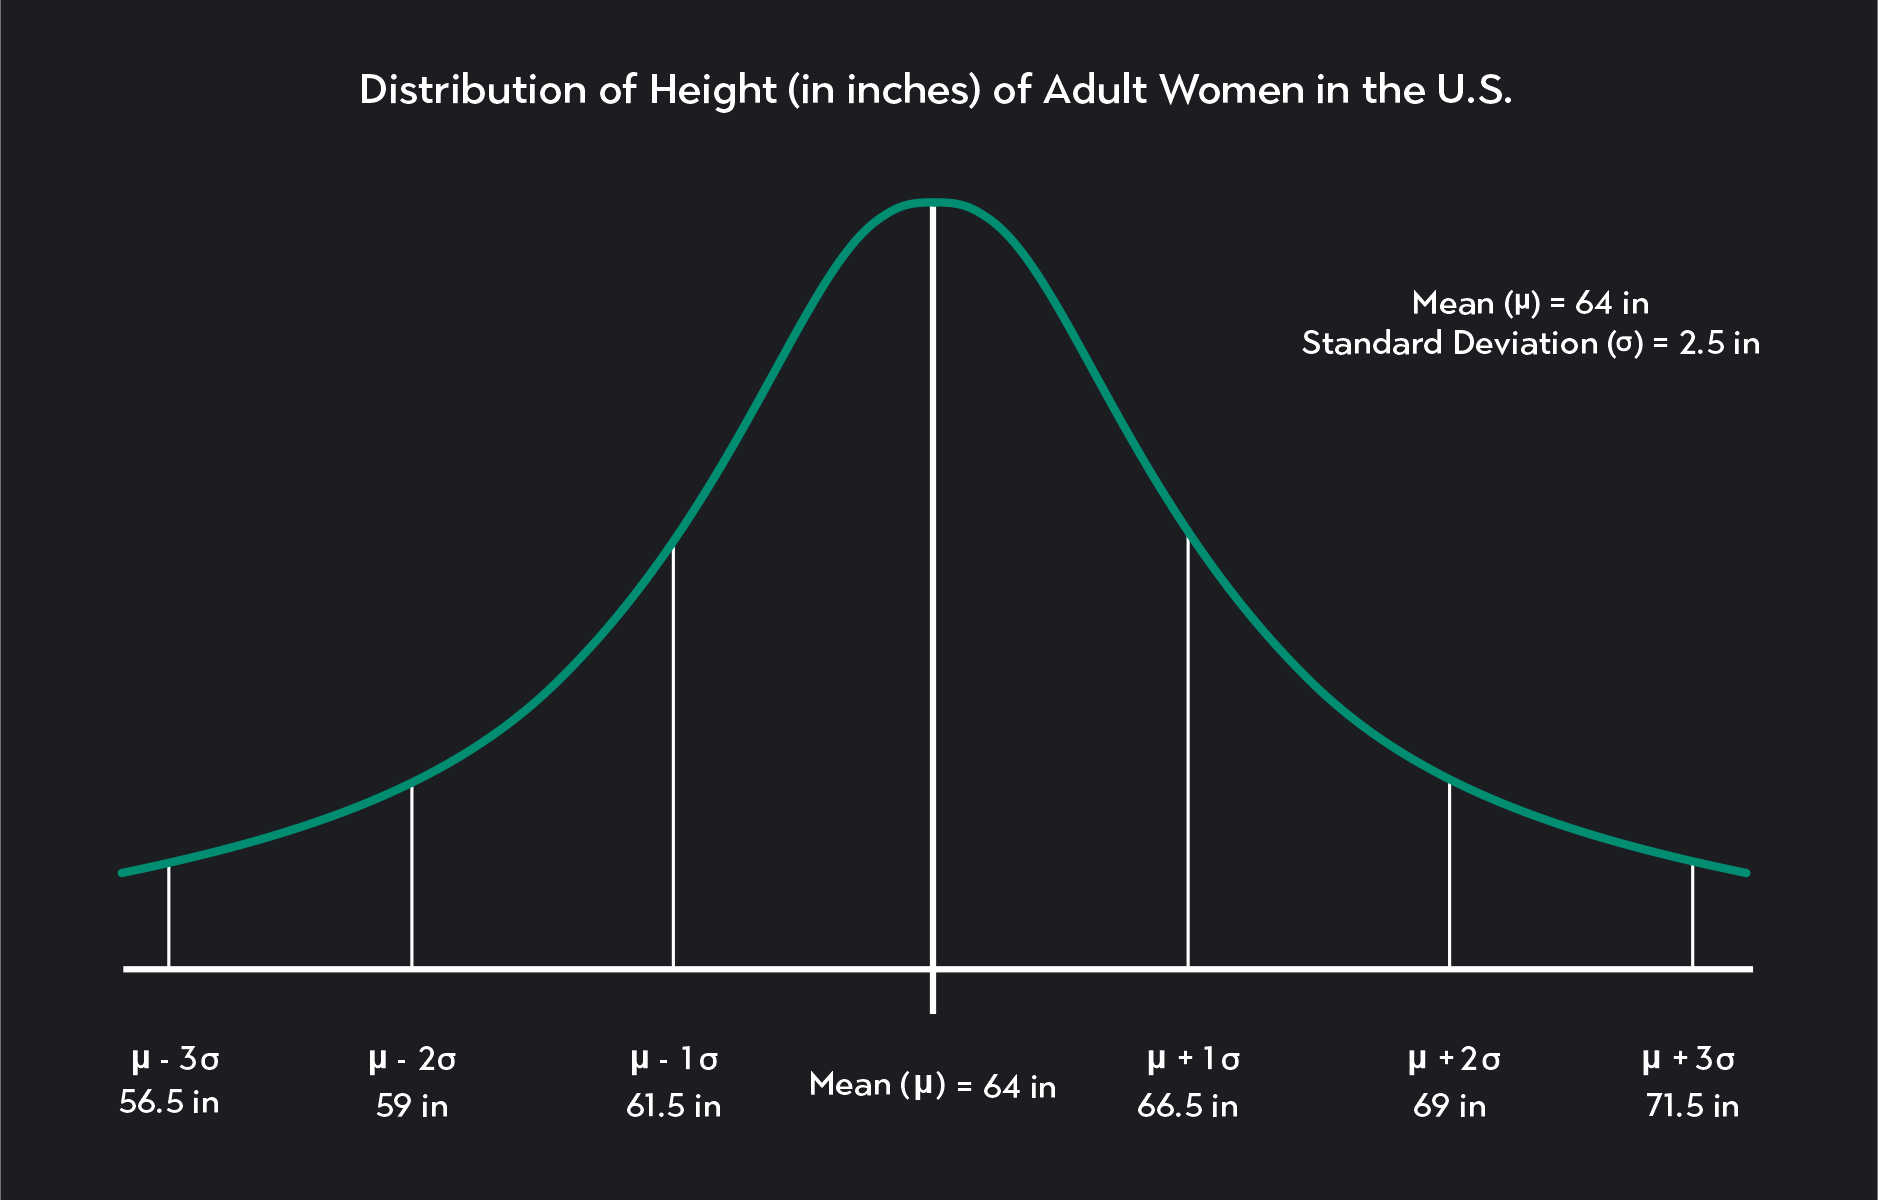 Normal distribution graph showing distribution of height for adult women in the U.S.